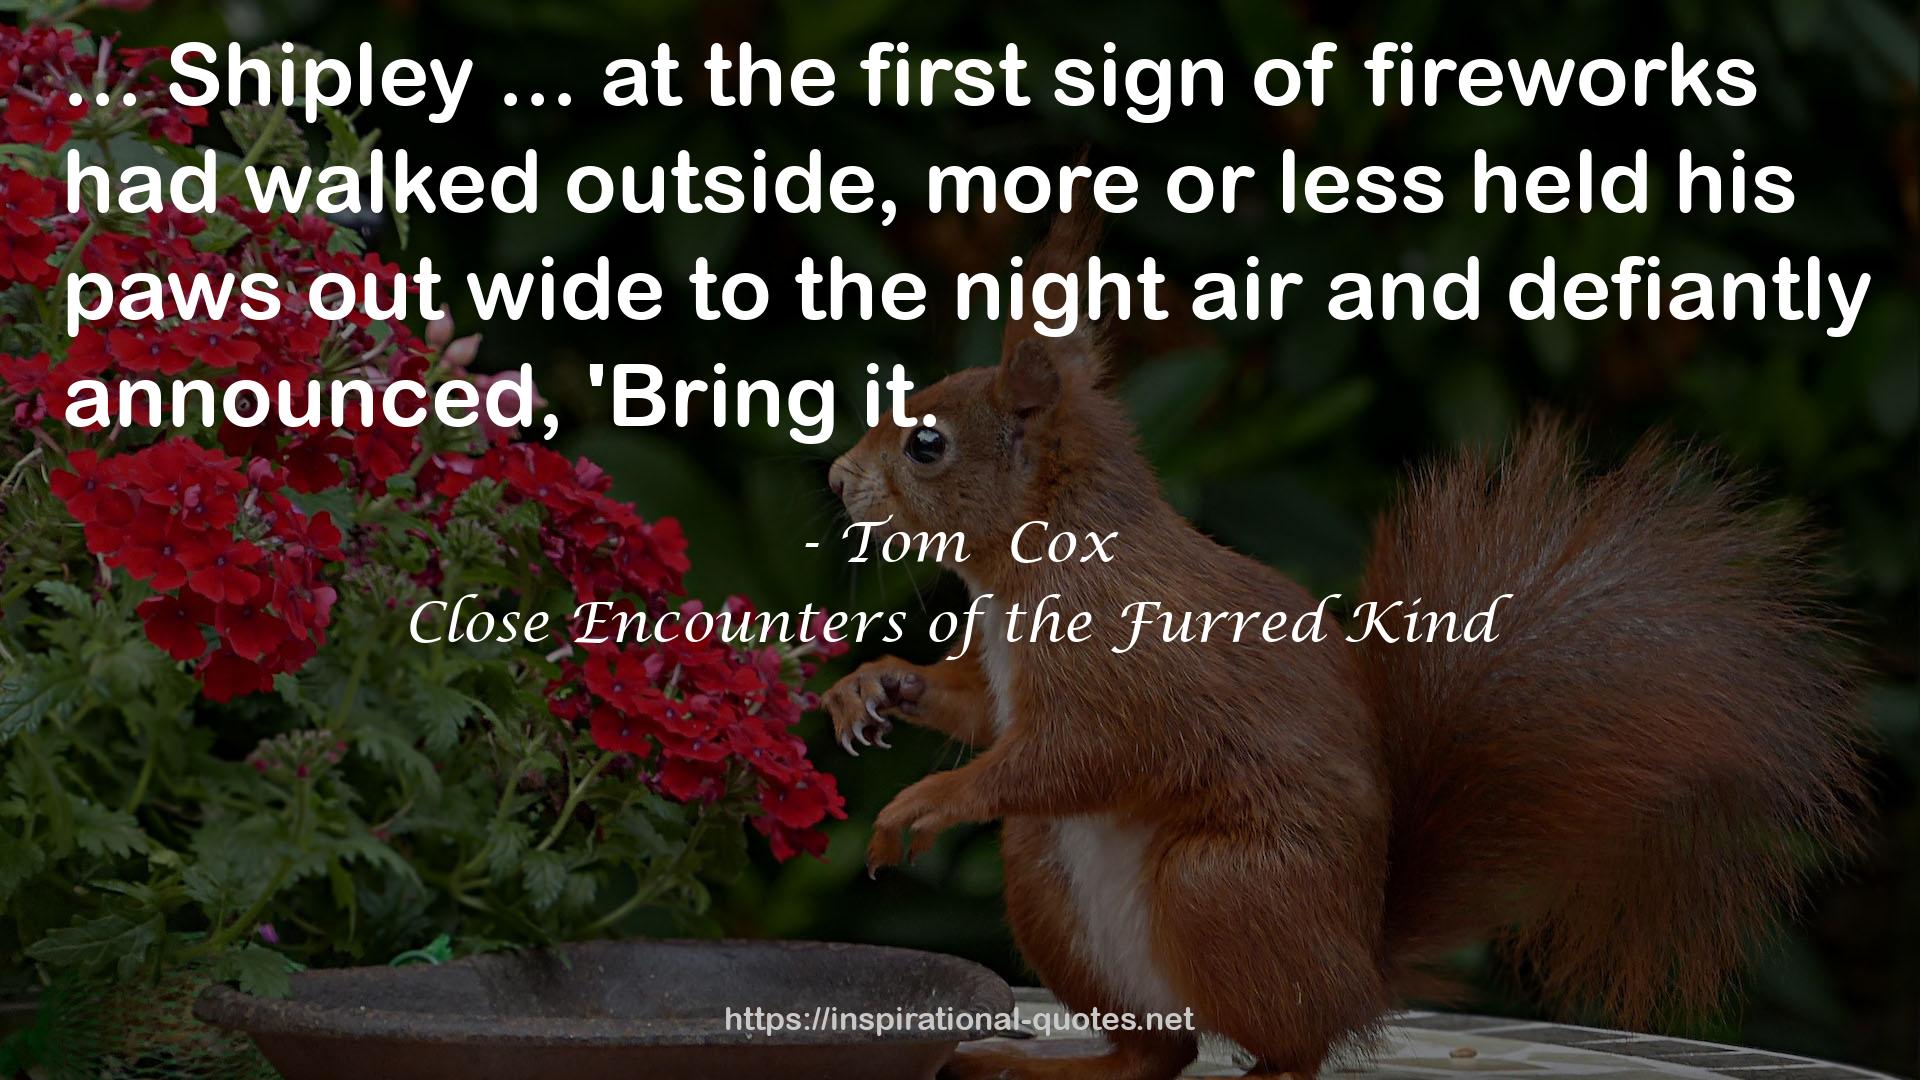 Close Encounters of the Furred Kind QUOTES